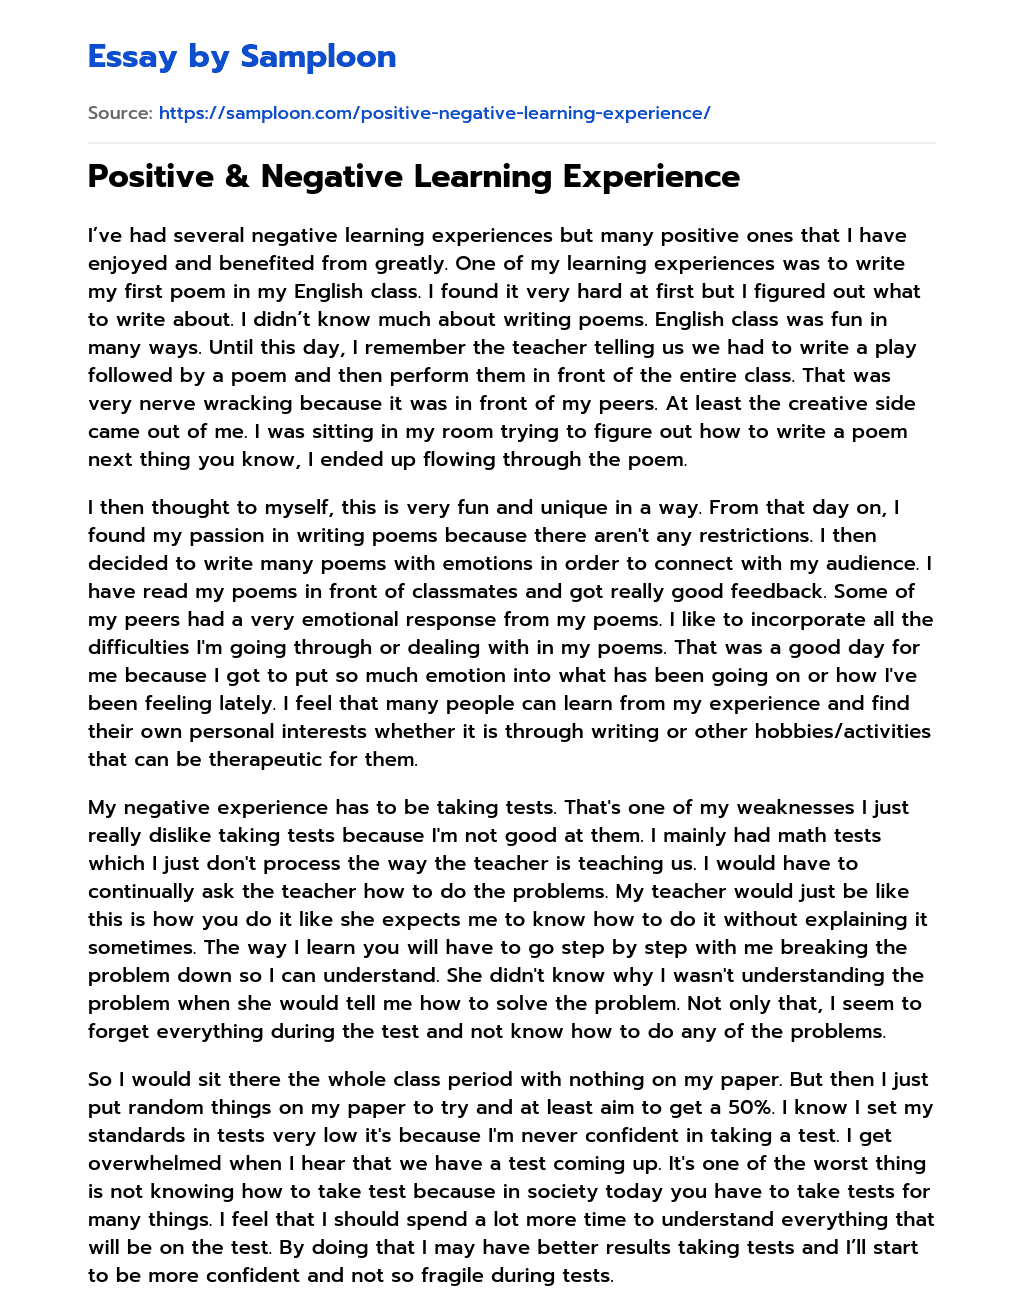 Positive & Negative Learning Experience essay